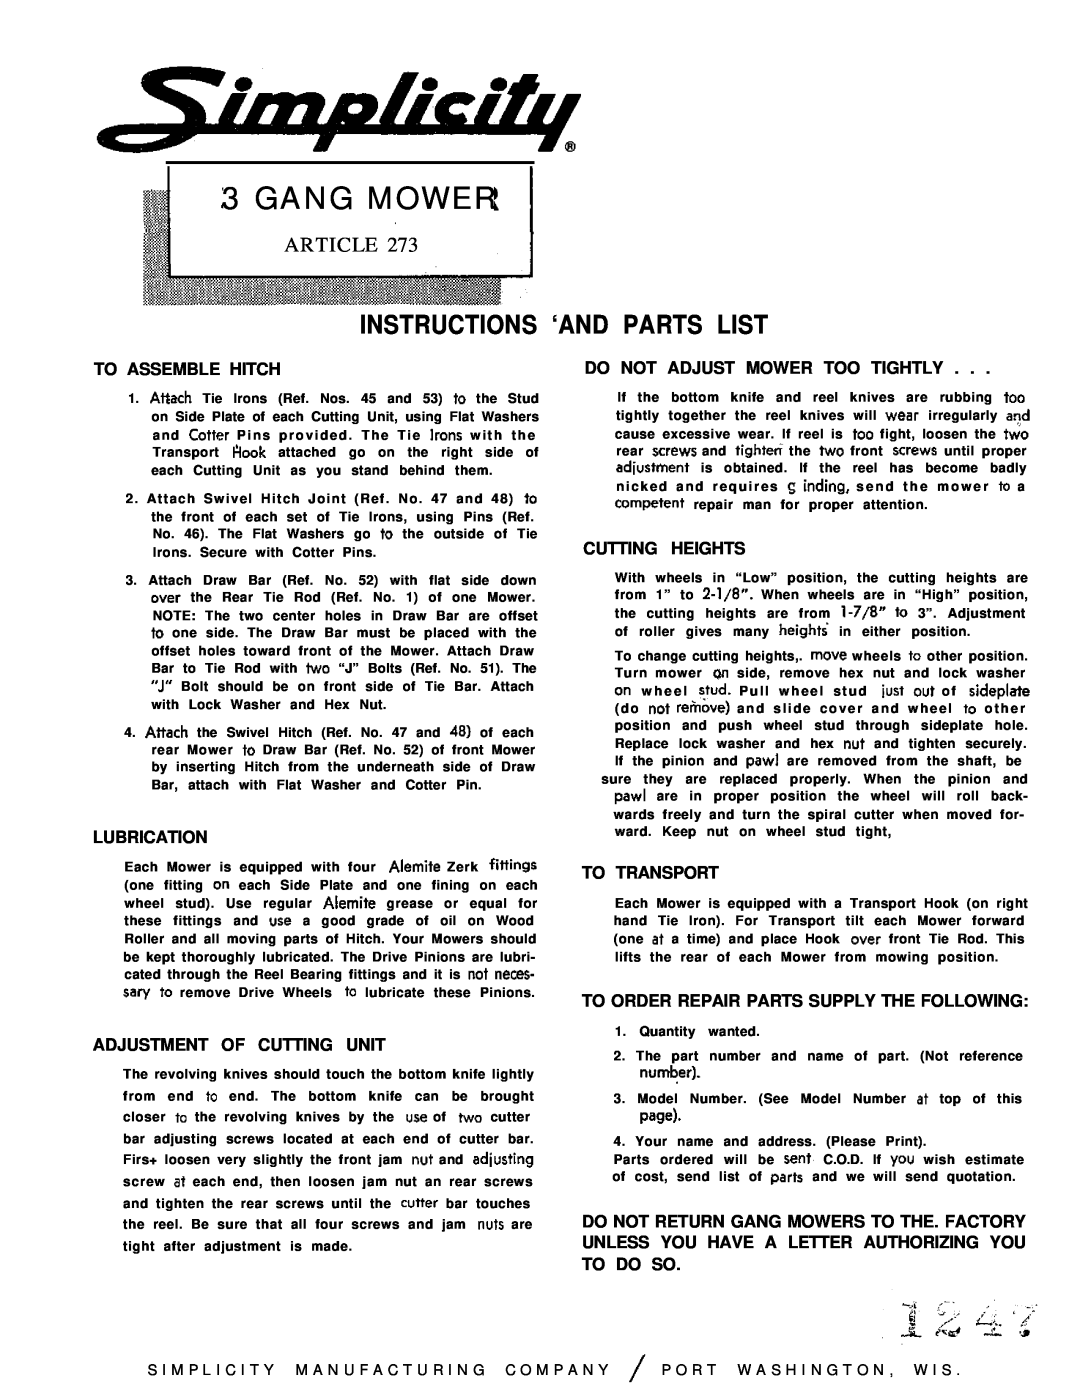 Simplicity Gang Mower manual Instructions ‘And Parts List, Article, To Assemble Hitch, Lubrication, Cutting Heights 